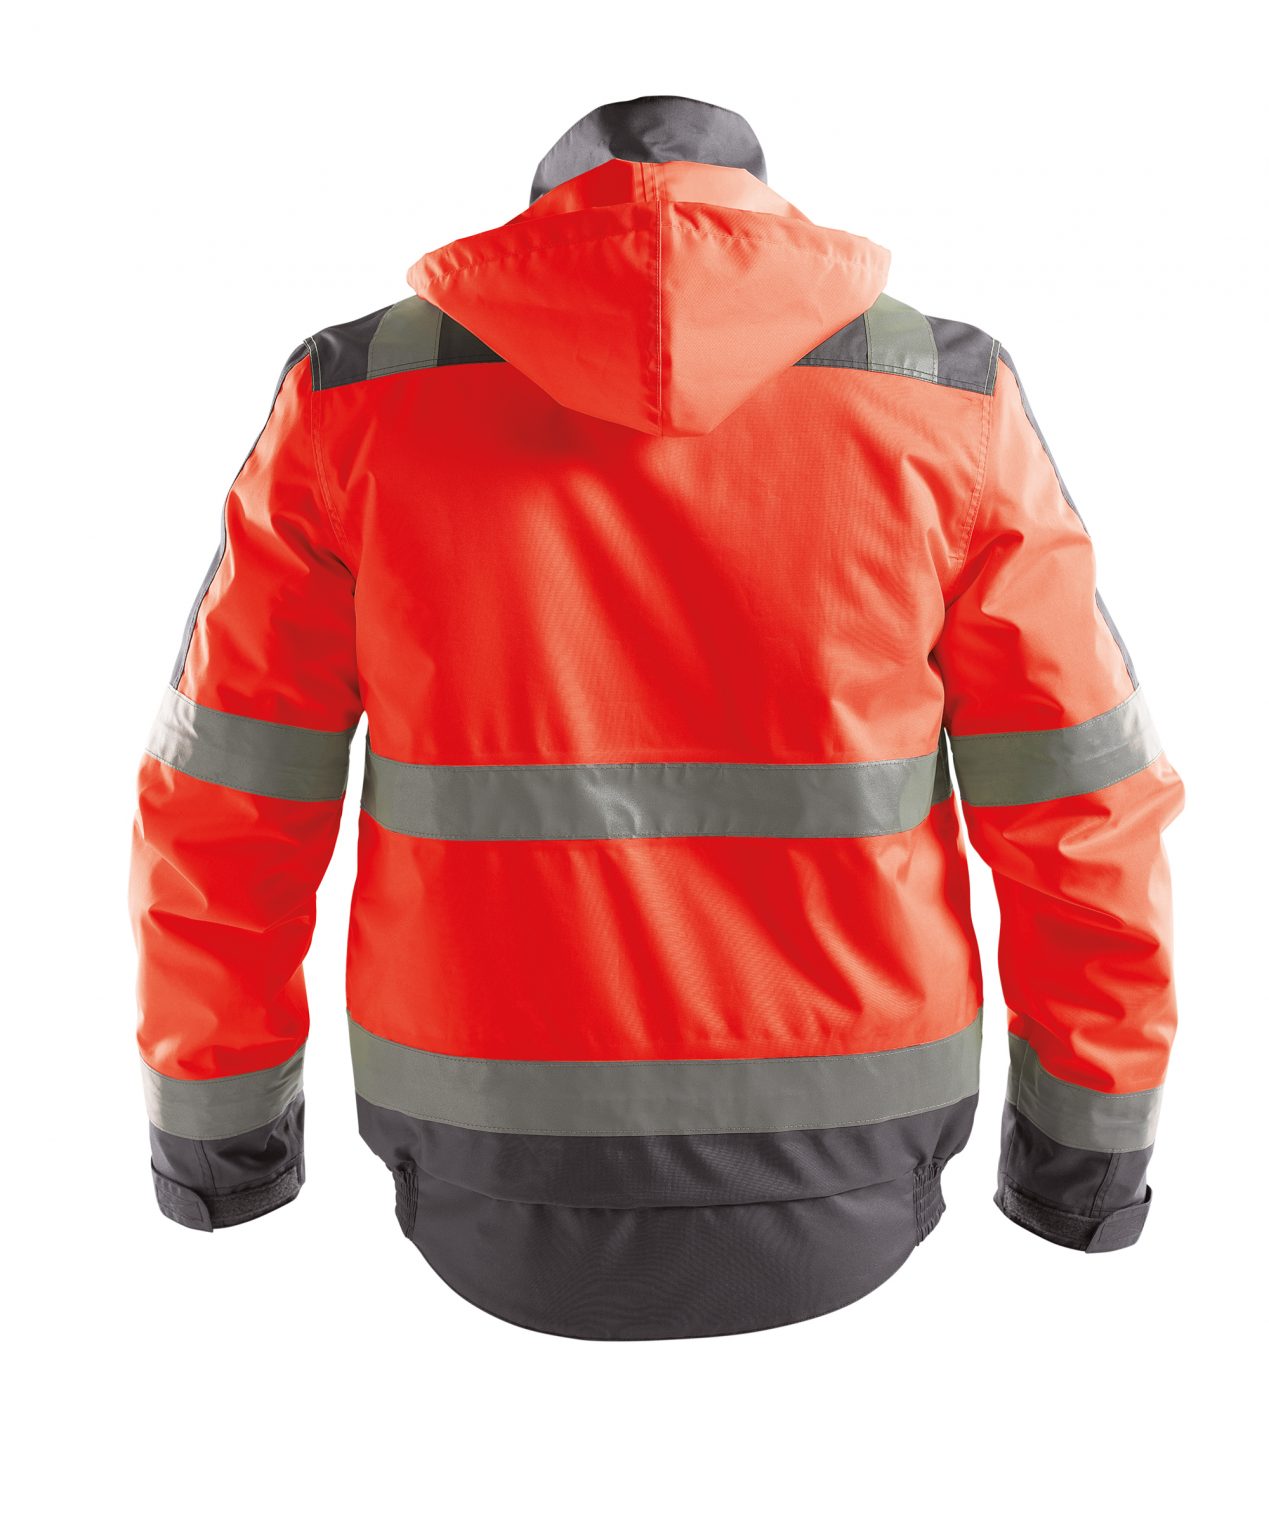 lima high visibility winter jacket fluo red cement grey back 1